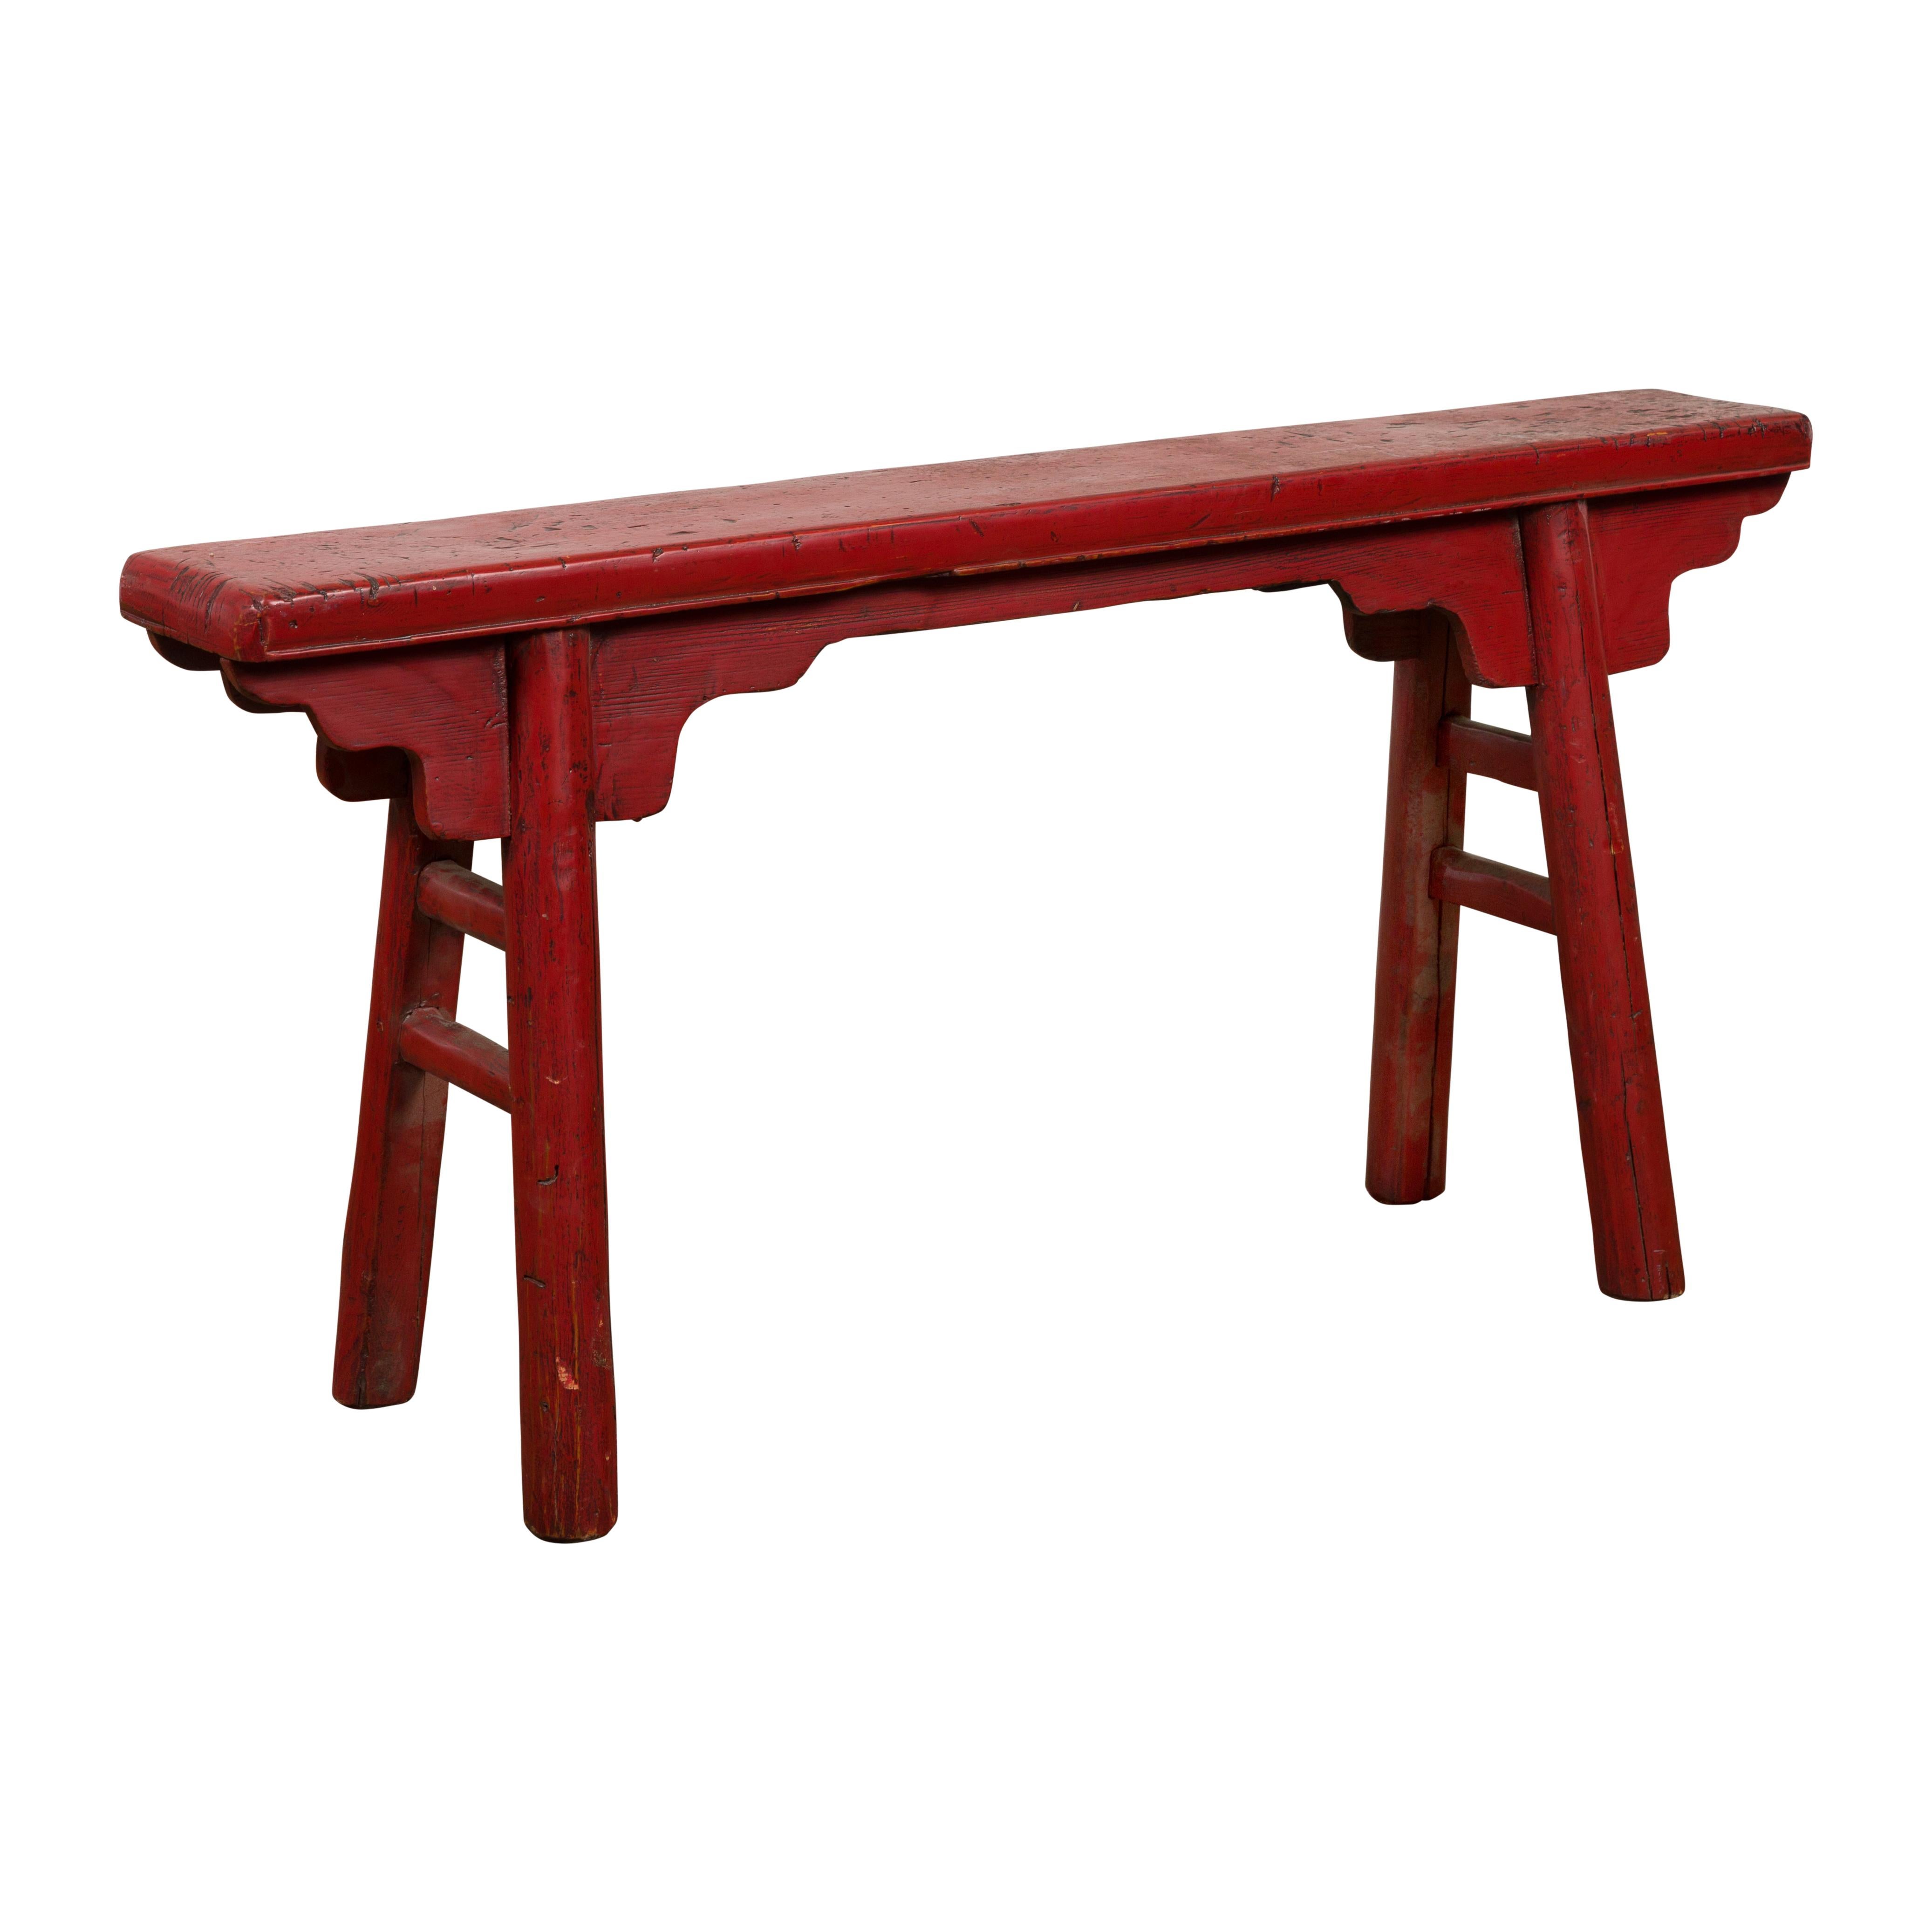 A Chinese vintage Ming Dynasty style red lacquer wooden bench from the mid 20th century with A-form base, carved spandrels and distressed finish. Embrace the timeless allure of this Chinese vintage Ming Dynasty-style red lacquer wooden bench from